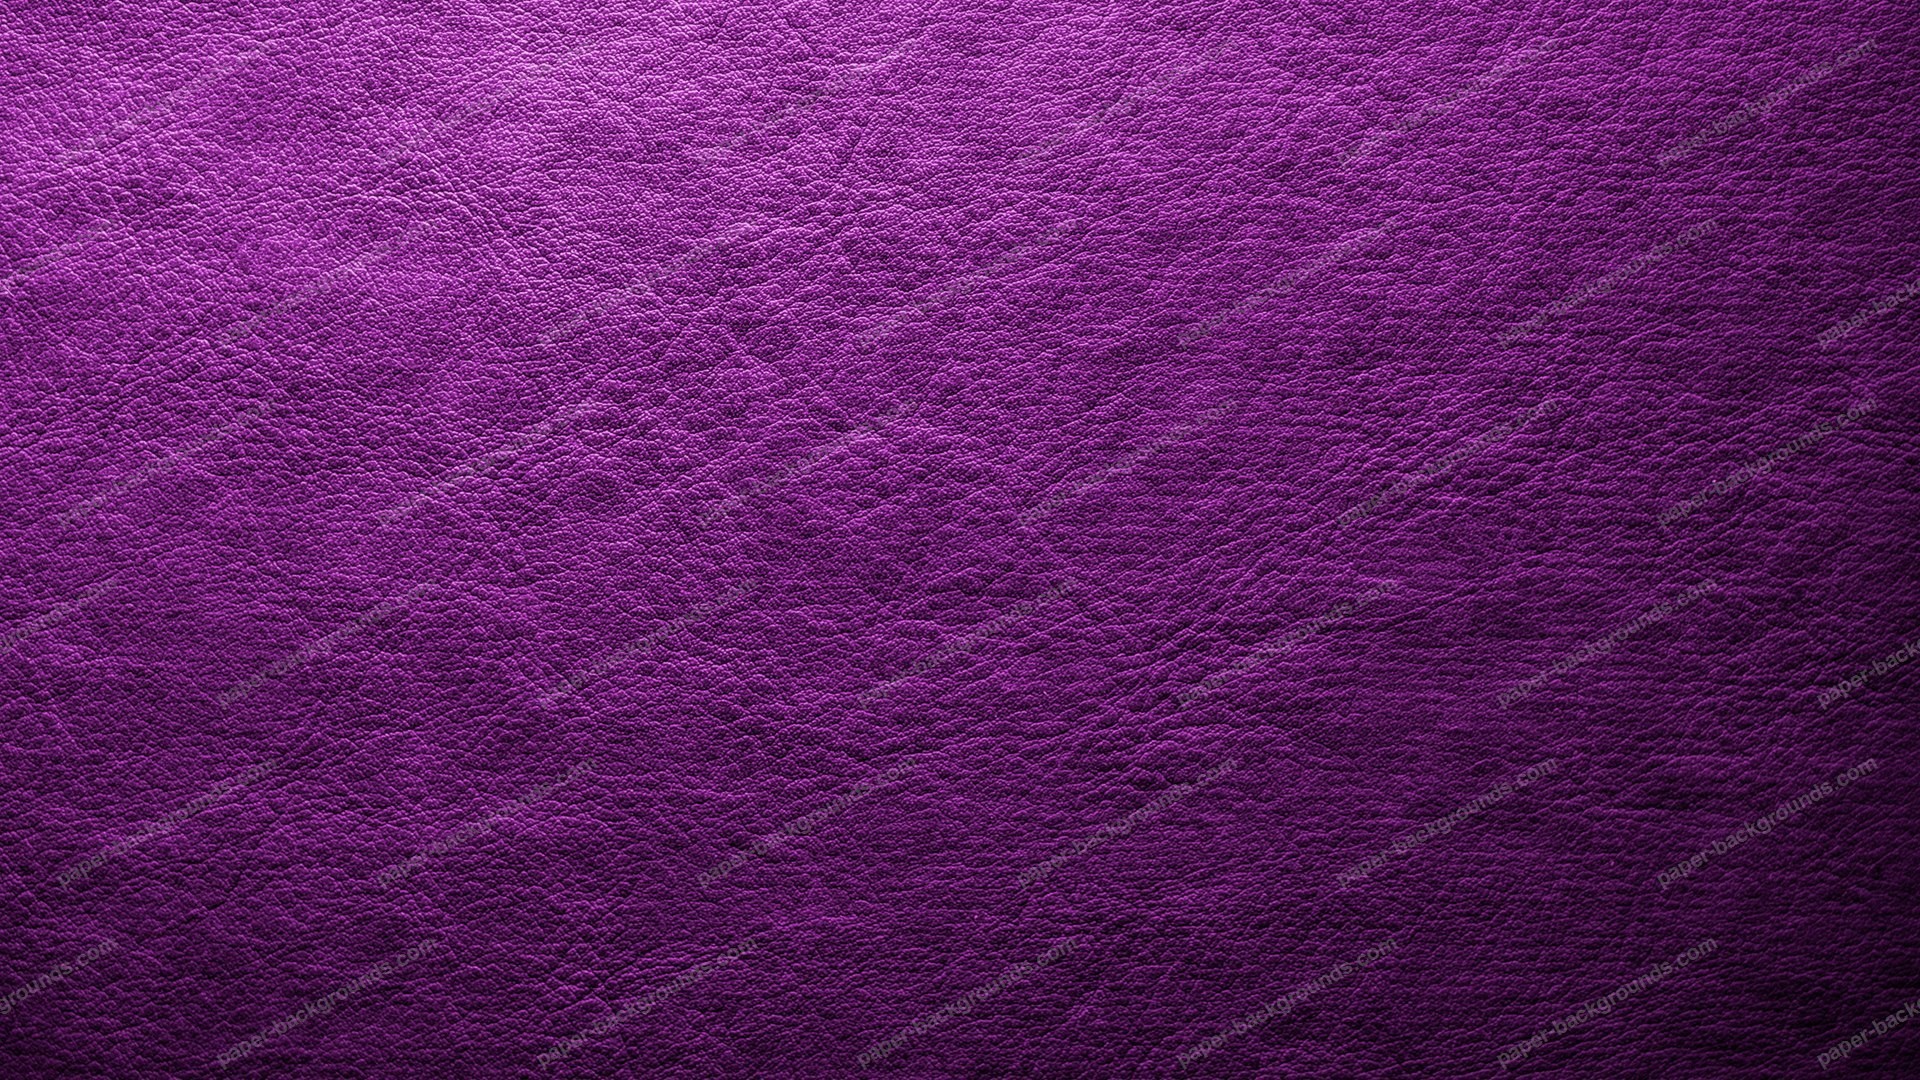 1920x1080  Purple Abstract Background wallpaper